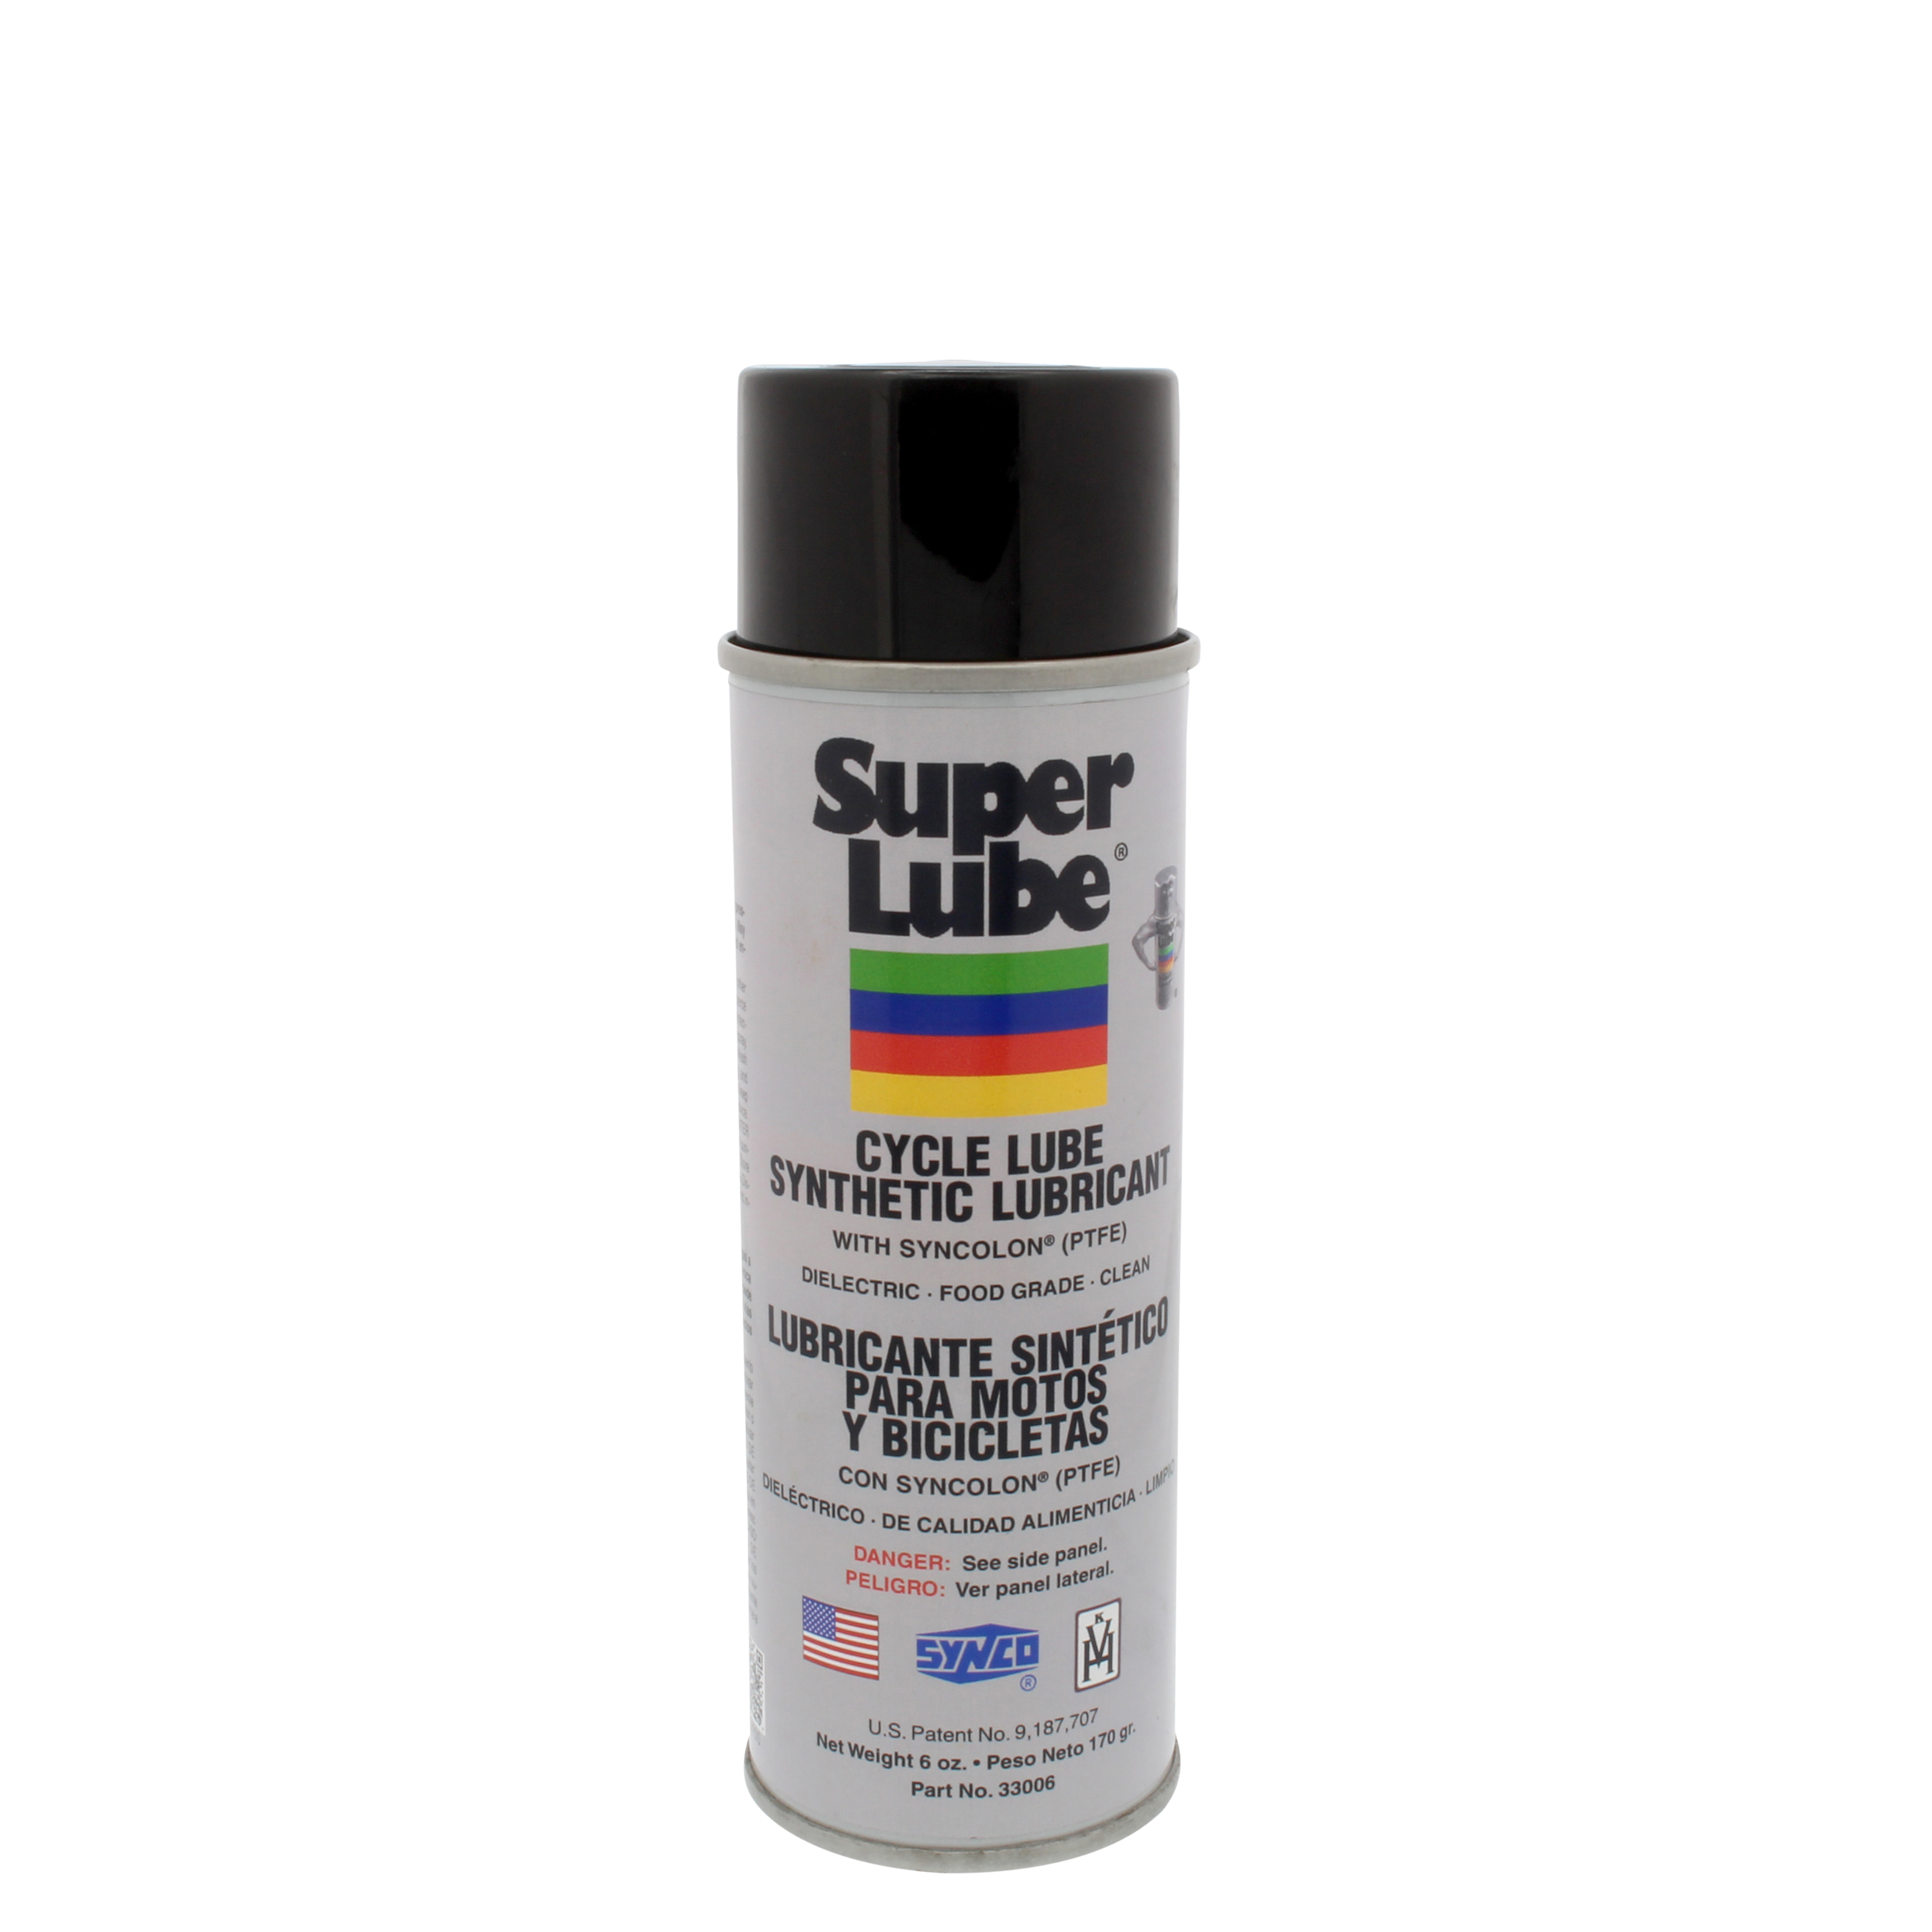 Super Lube® 循環潤滑合成潤滑劑Cycle Lube Synthetic Lubricant 33006 